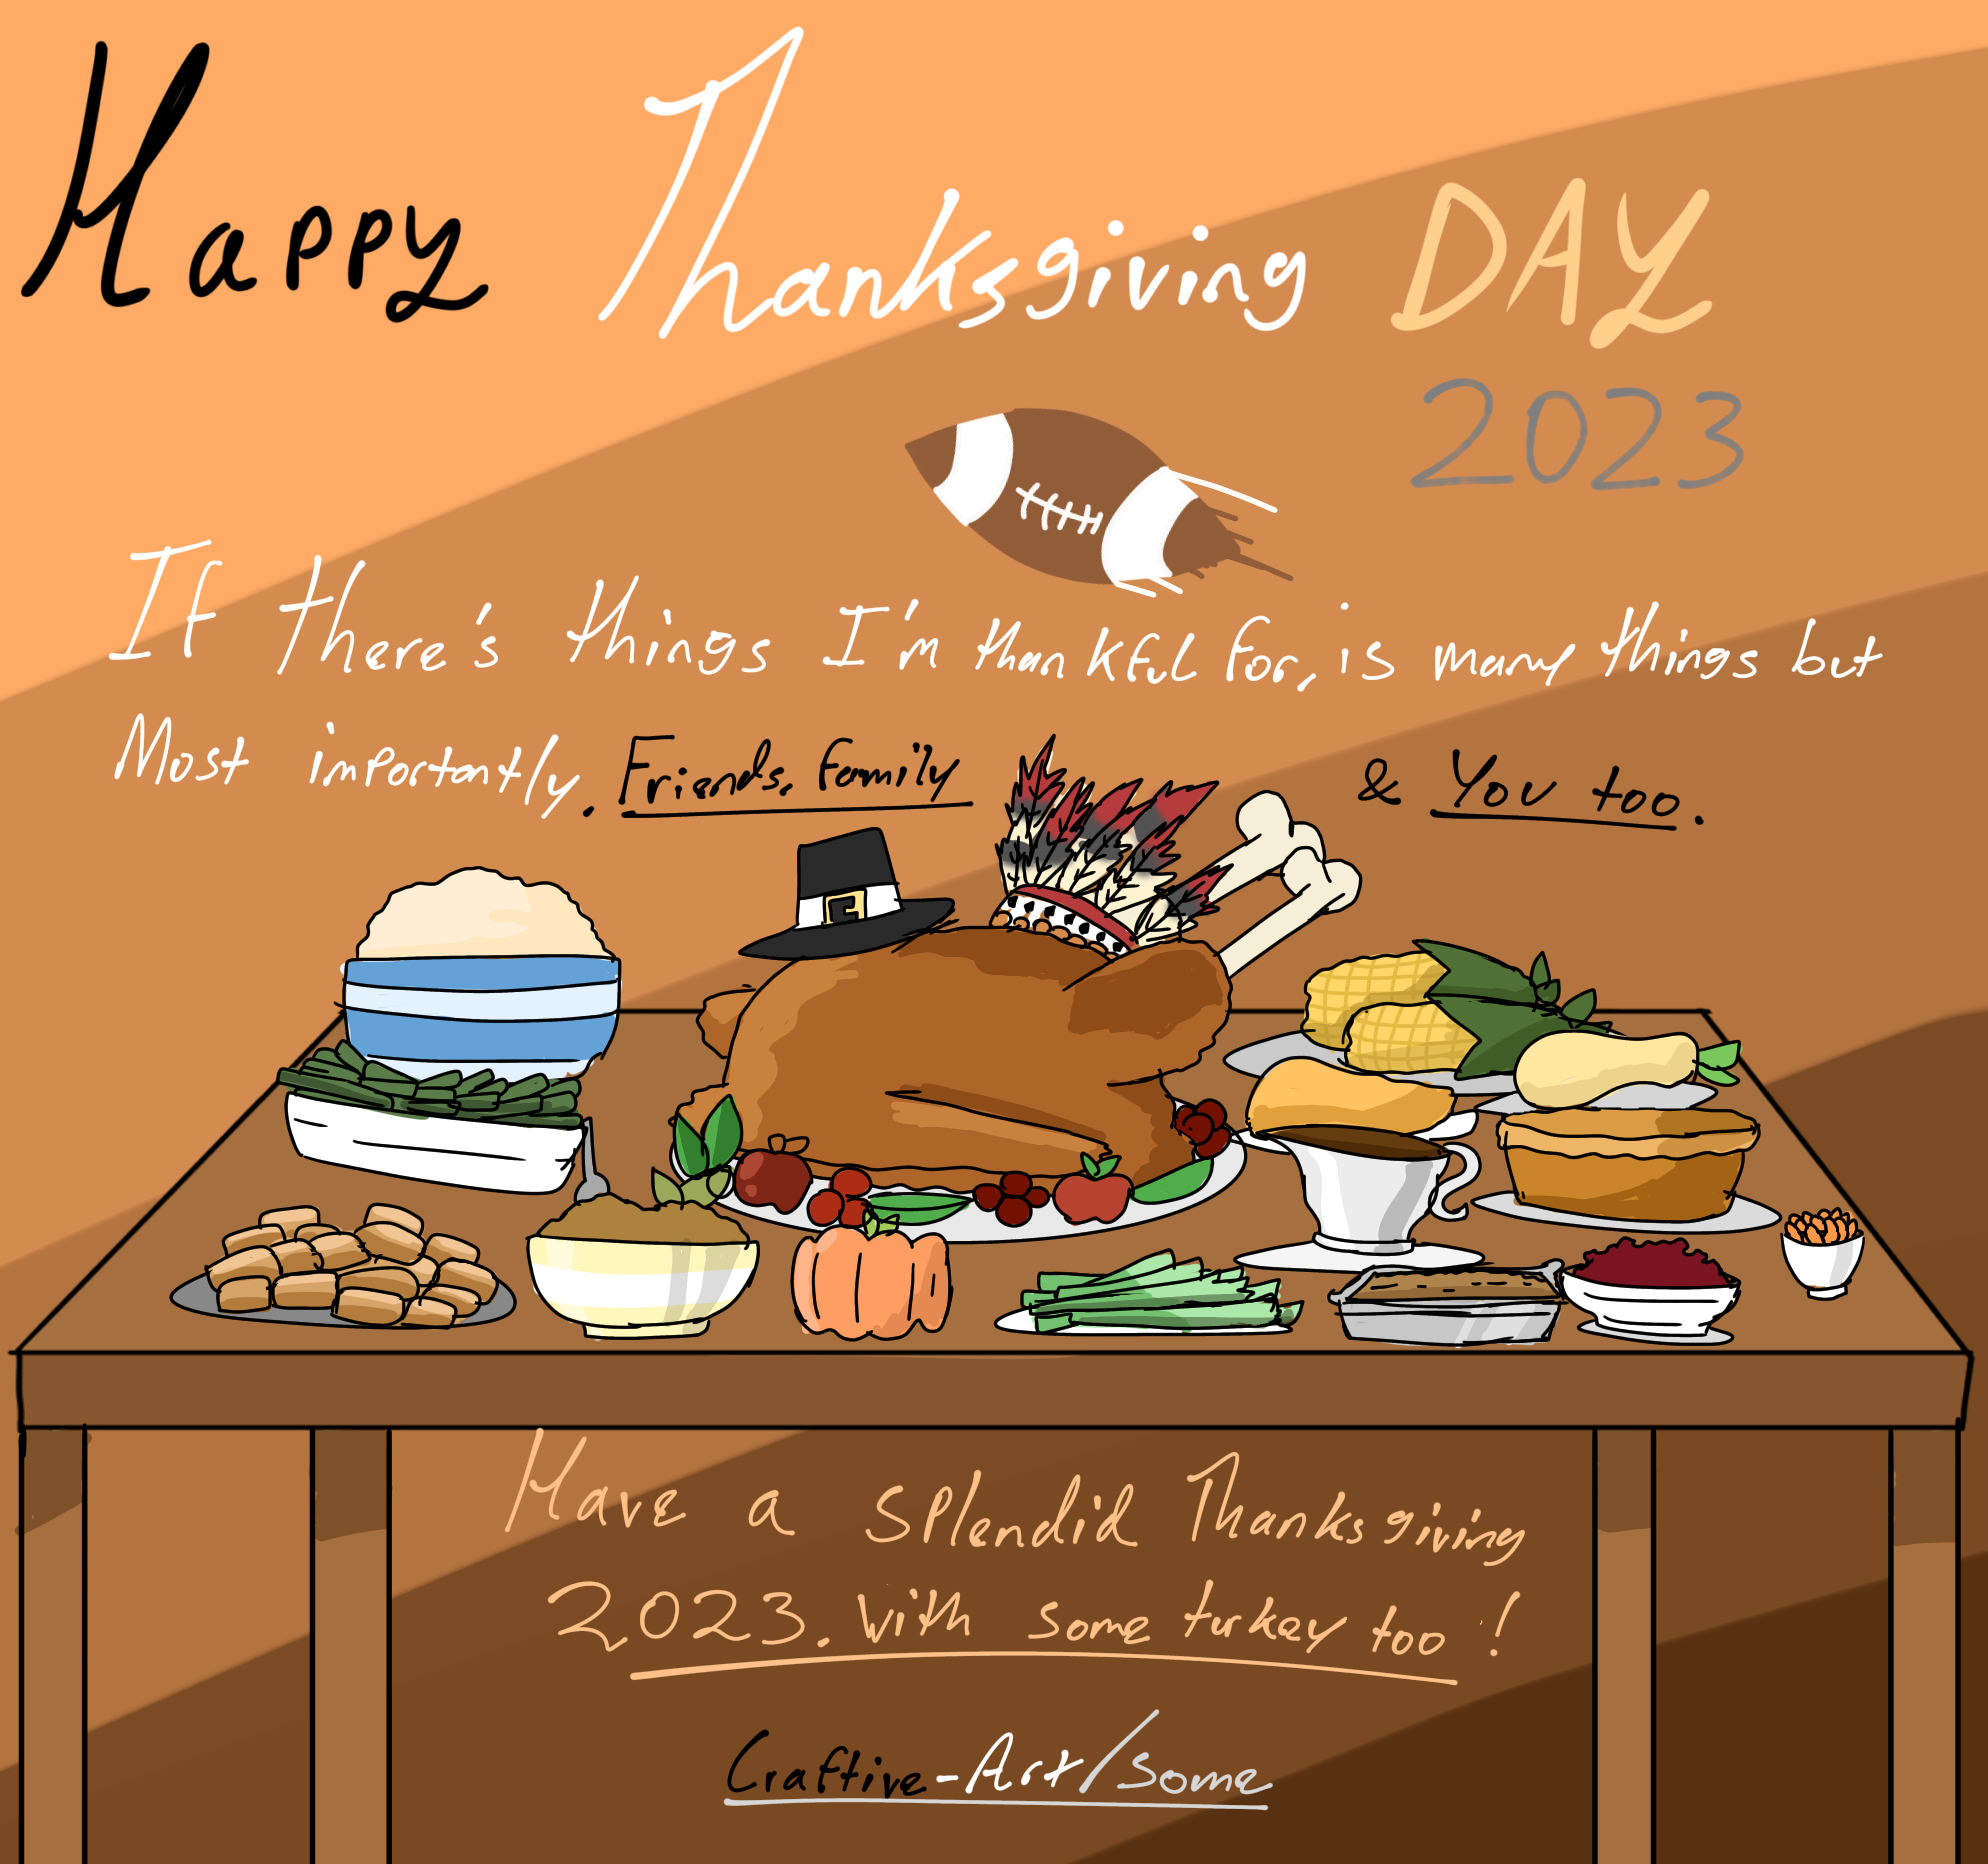 What Are You Thankful For This Thanksgiving Day 2023? The